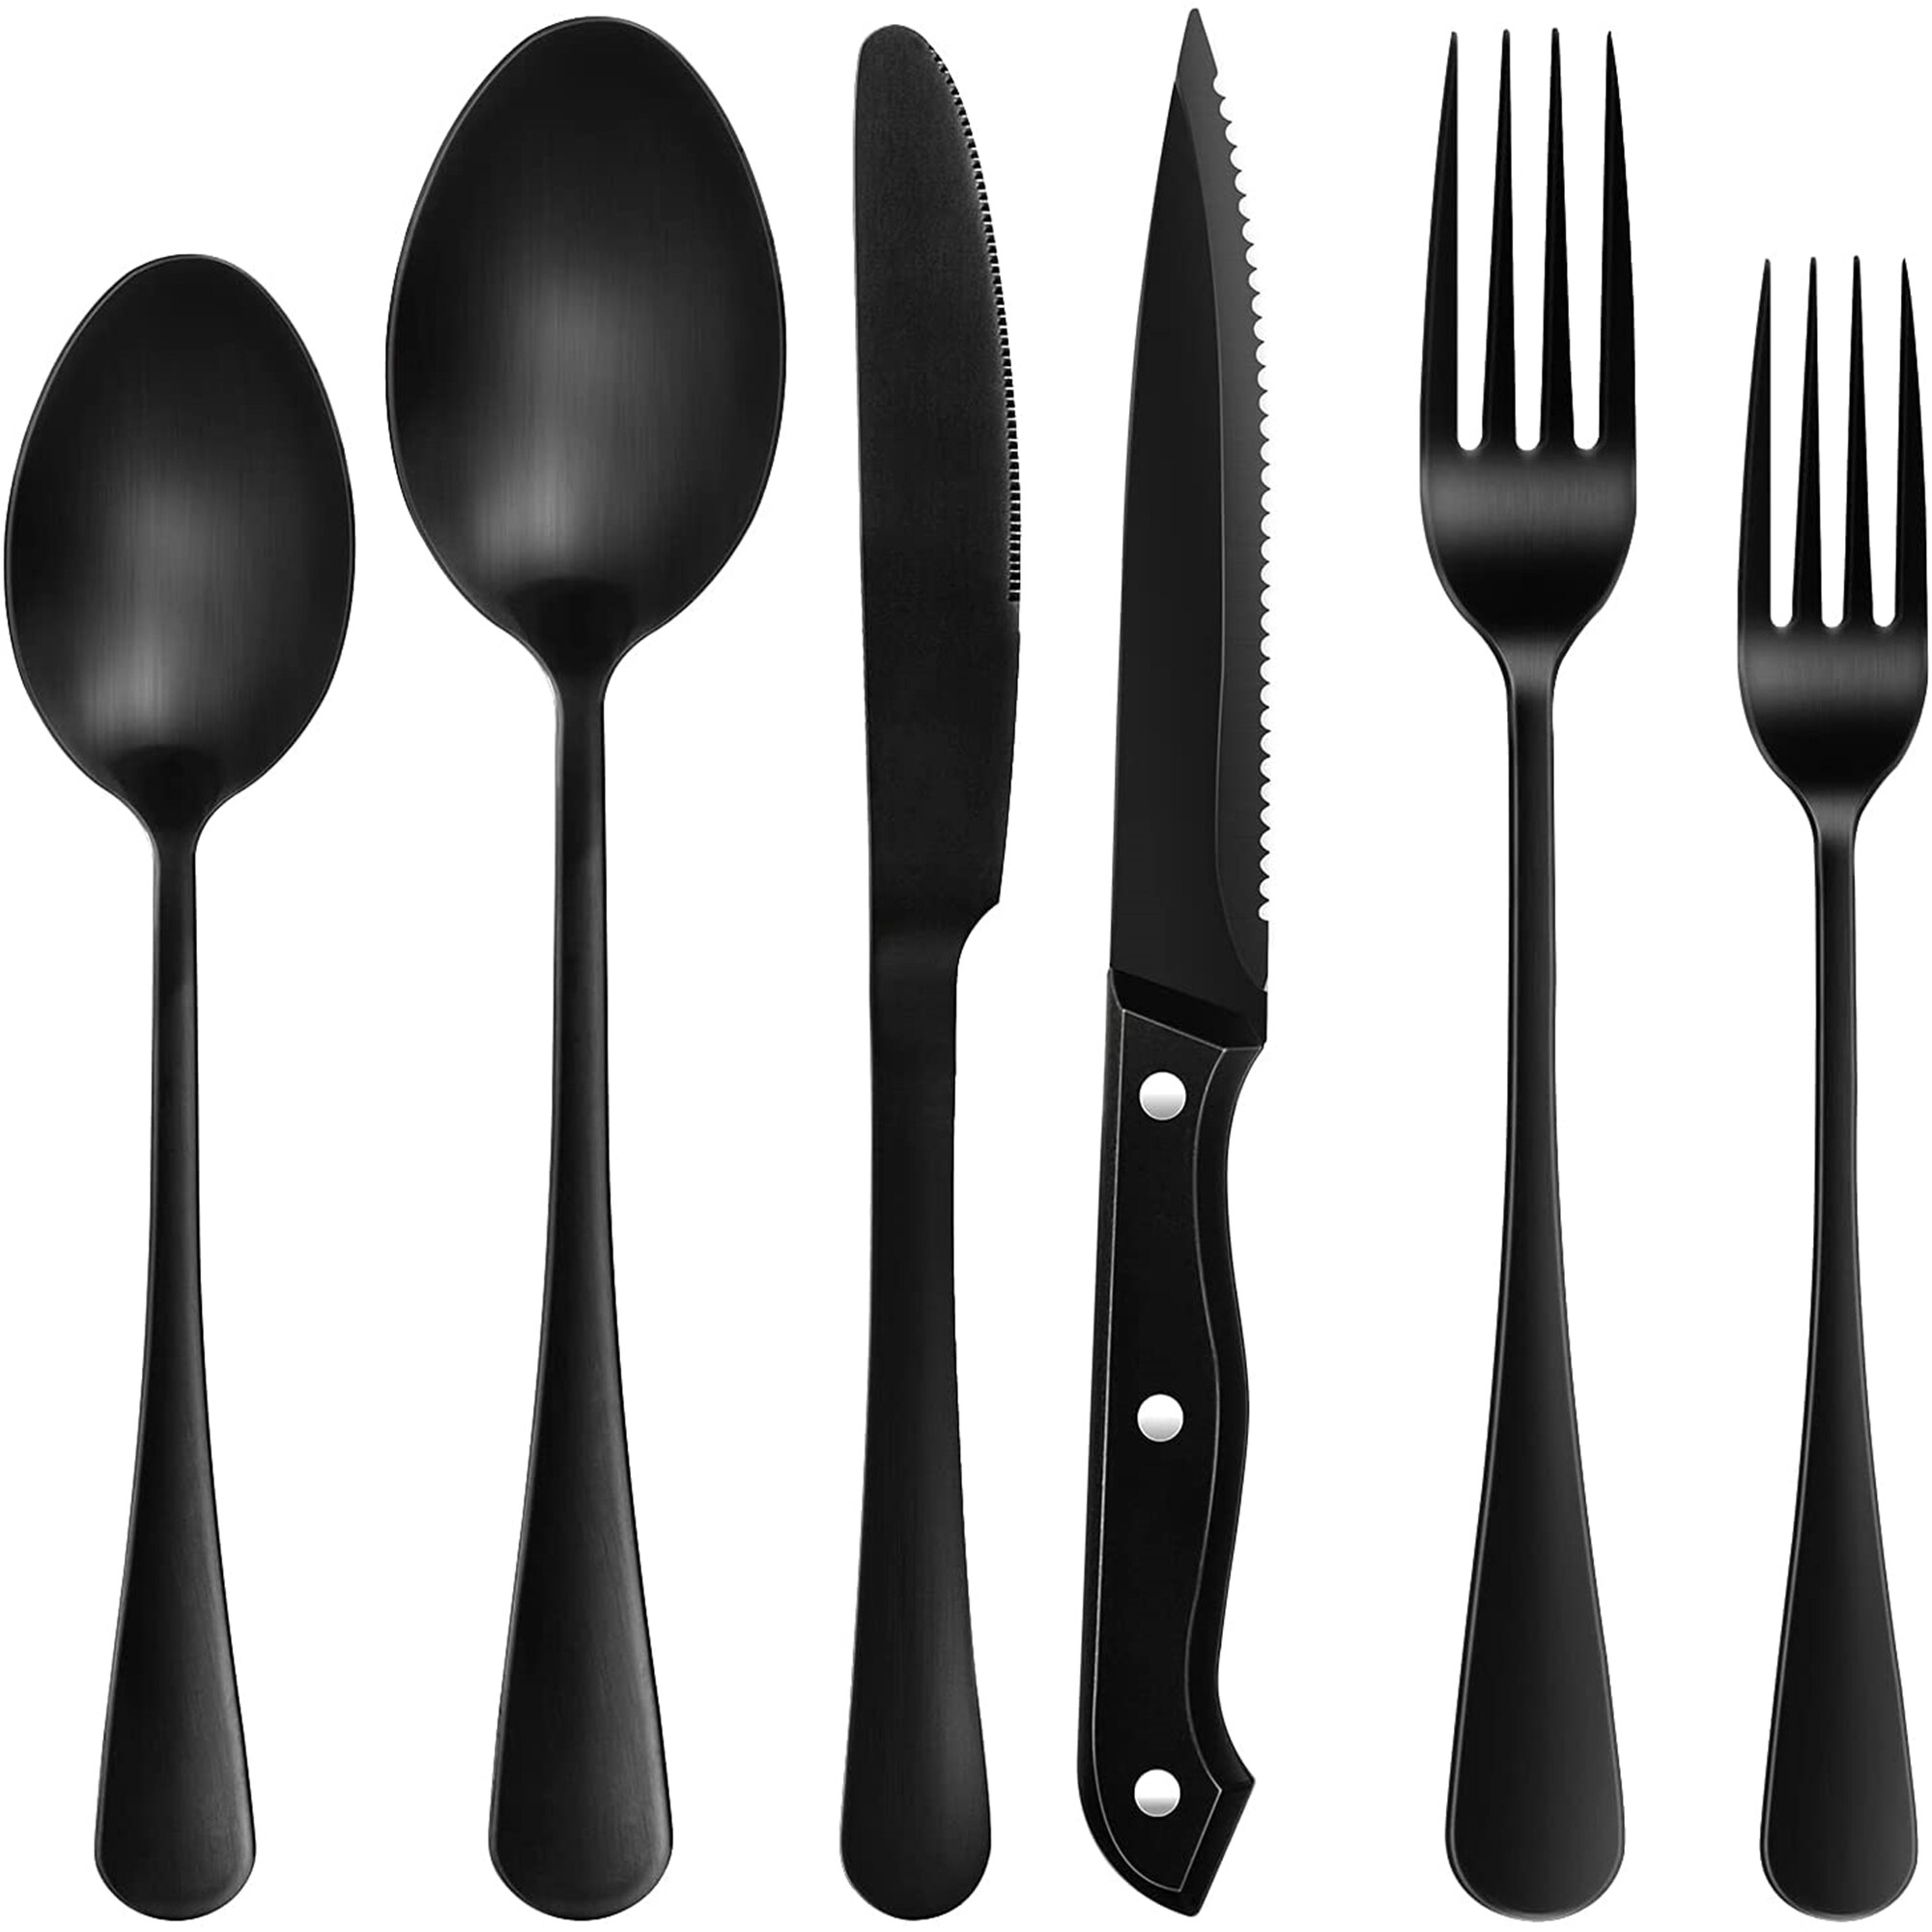 https://ak1.ostkcdn.com/images/products/is/images/direct/1f8220450373ab66bb5730934112b2f14291cc64/Matte-Black-Silverware-Set%2C-24-48-Pieces-Stainless-Steel-Flatware-set-with-Steak-Knives-for-8%2C-Tableware-Cutlery-Set%2C-Utensils.jpg